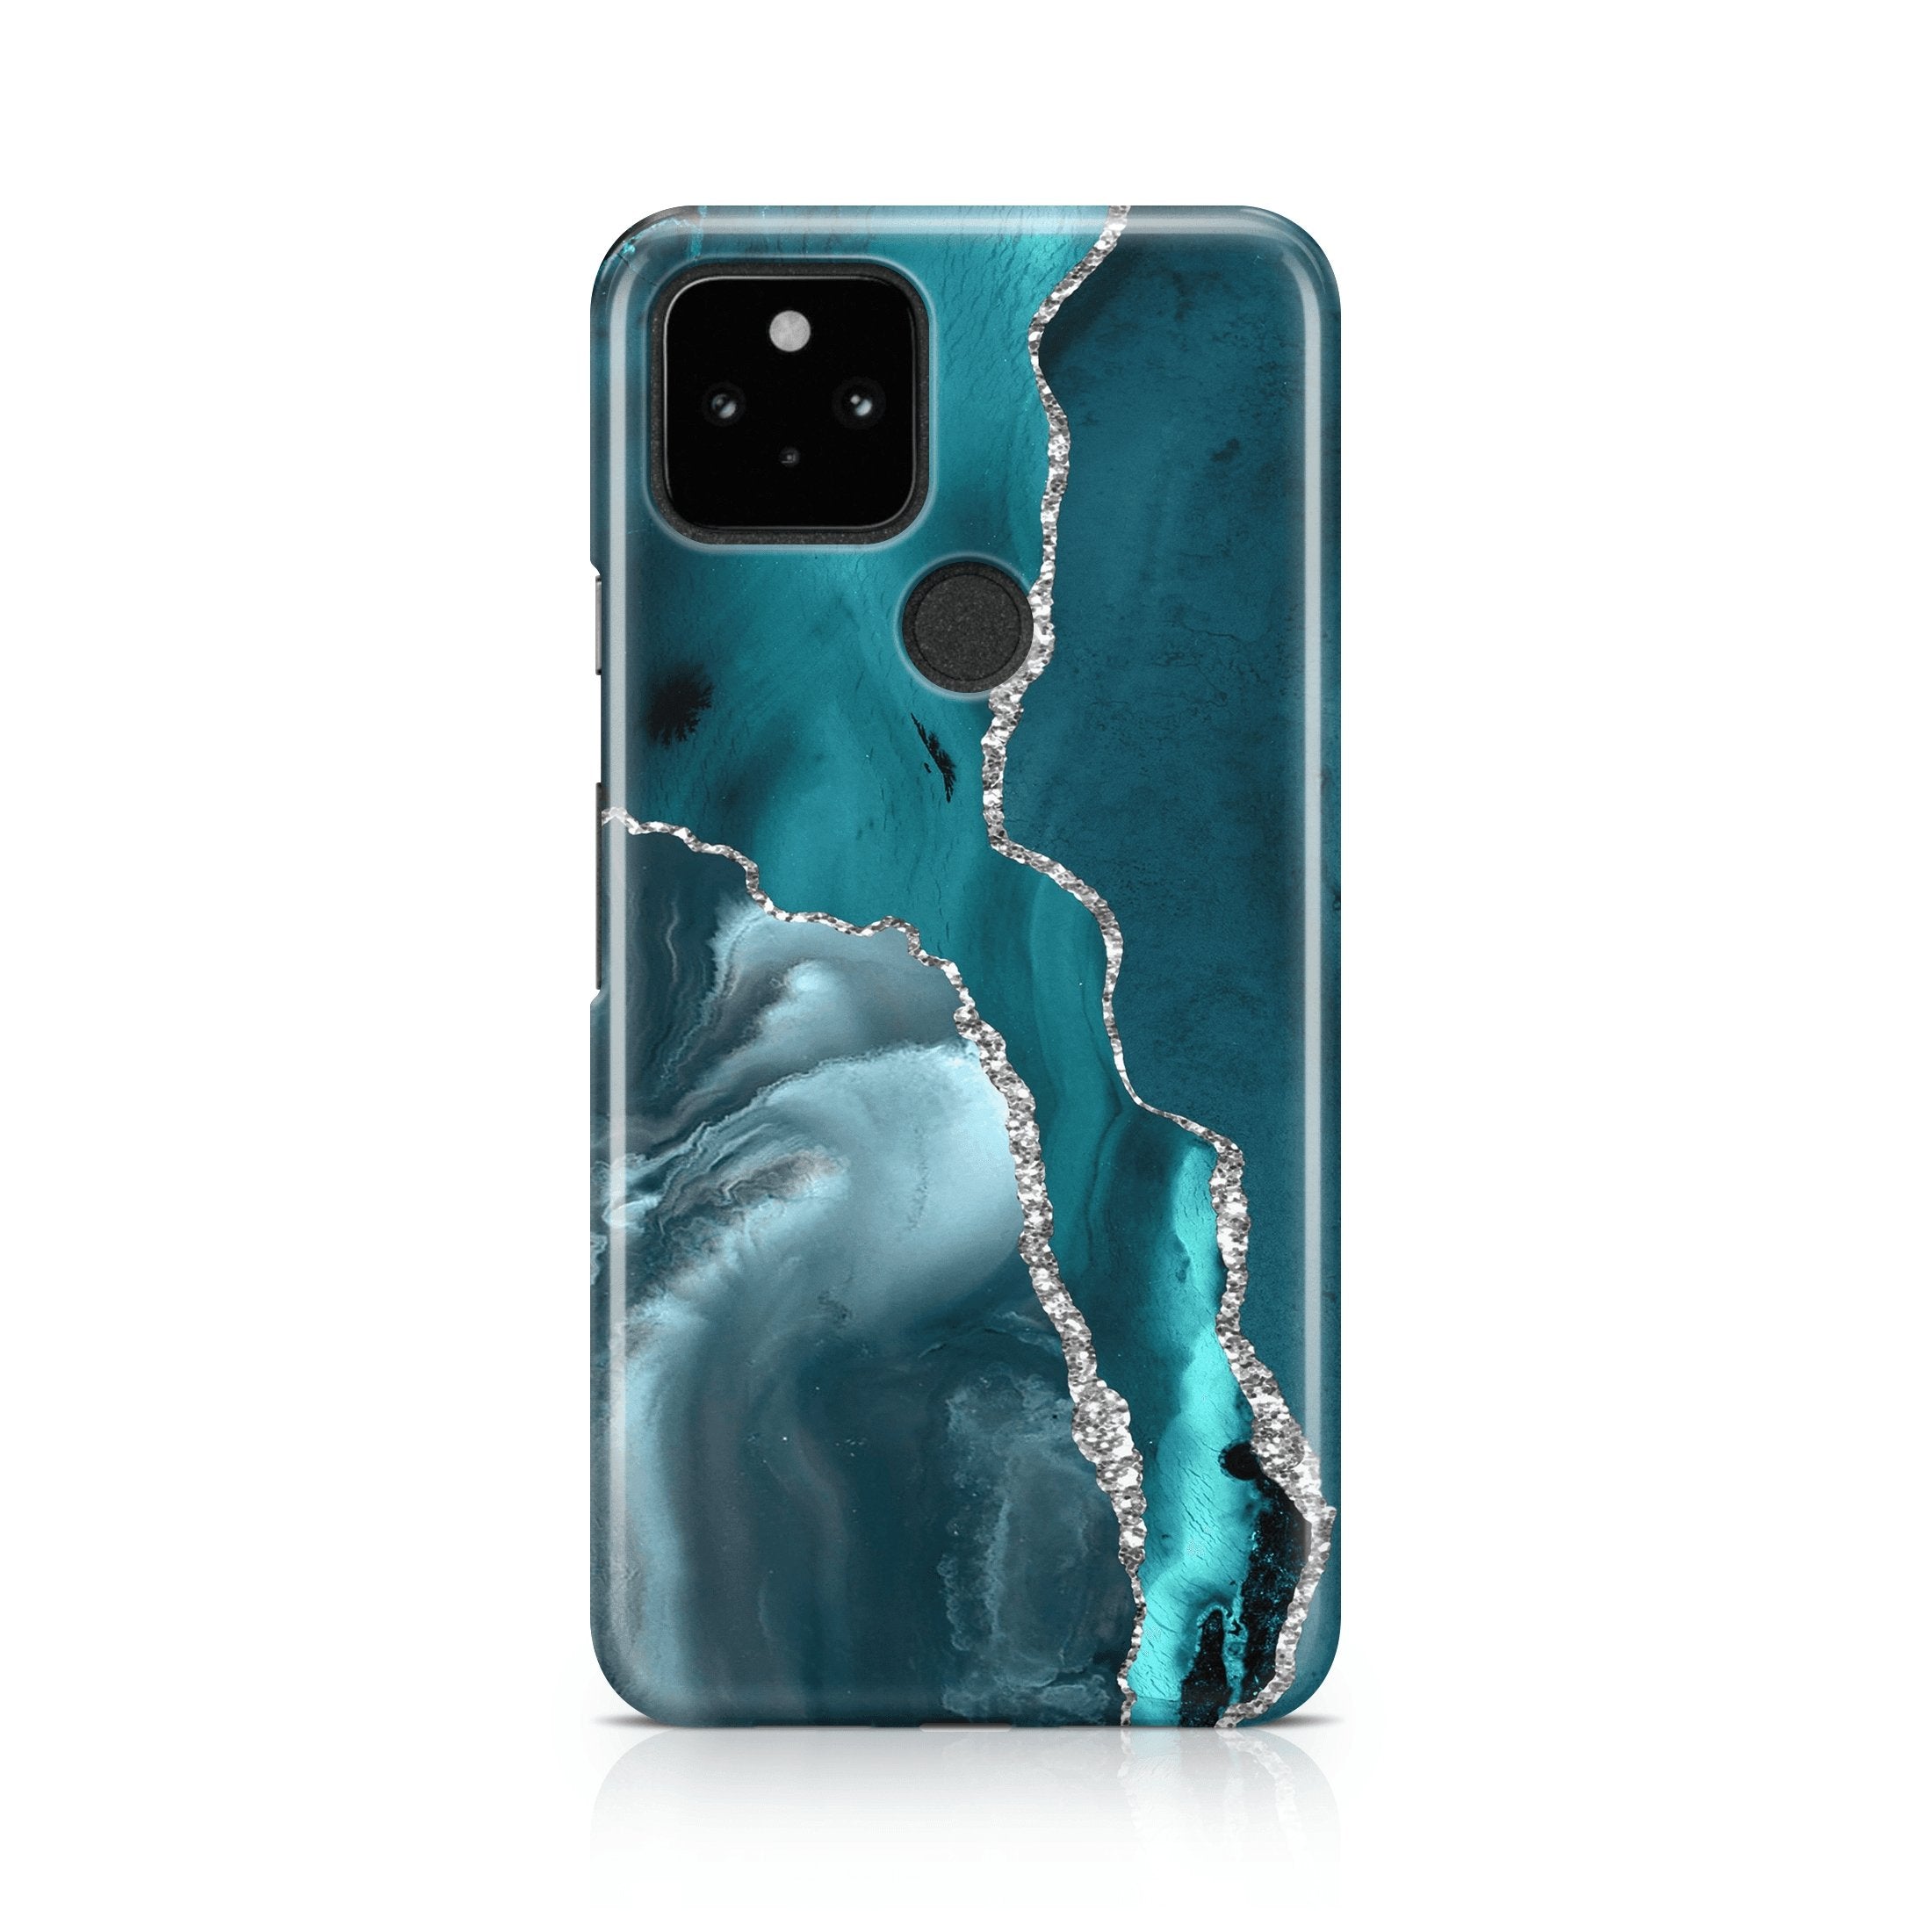 Teal Elegance IV - Google phone case designs by CaseSwagger